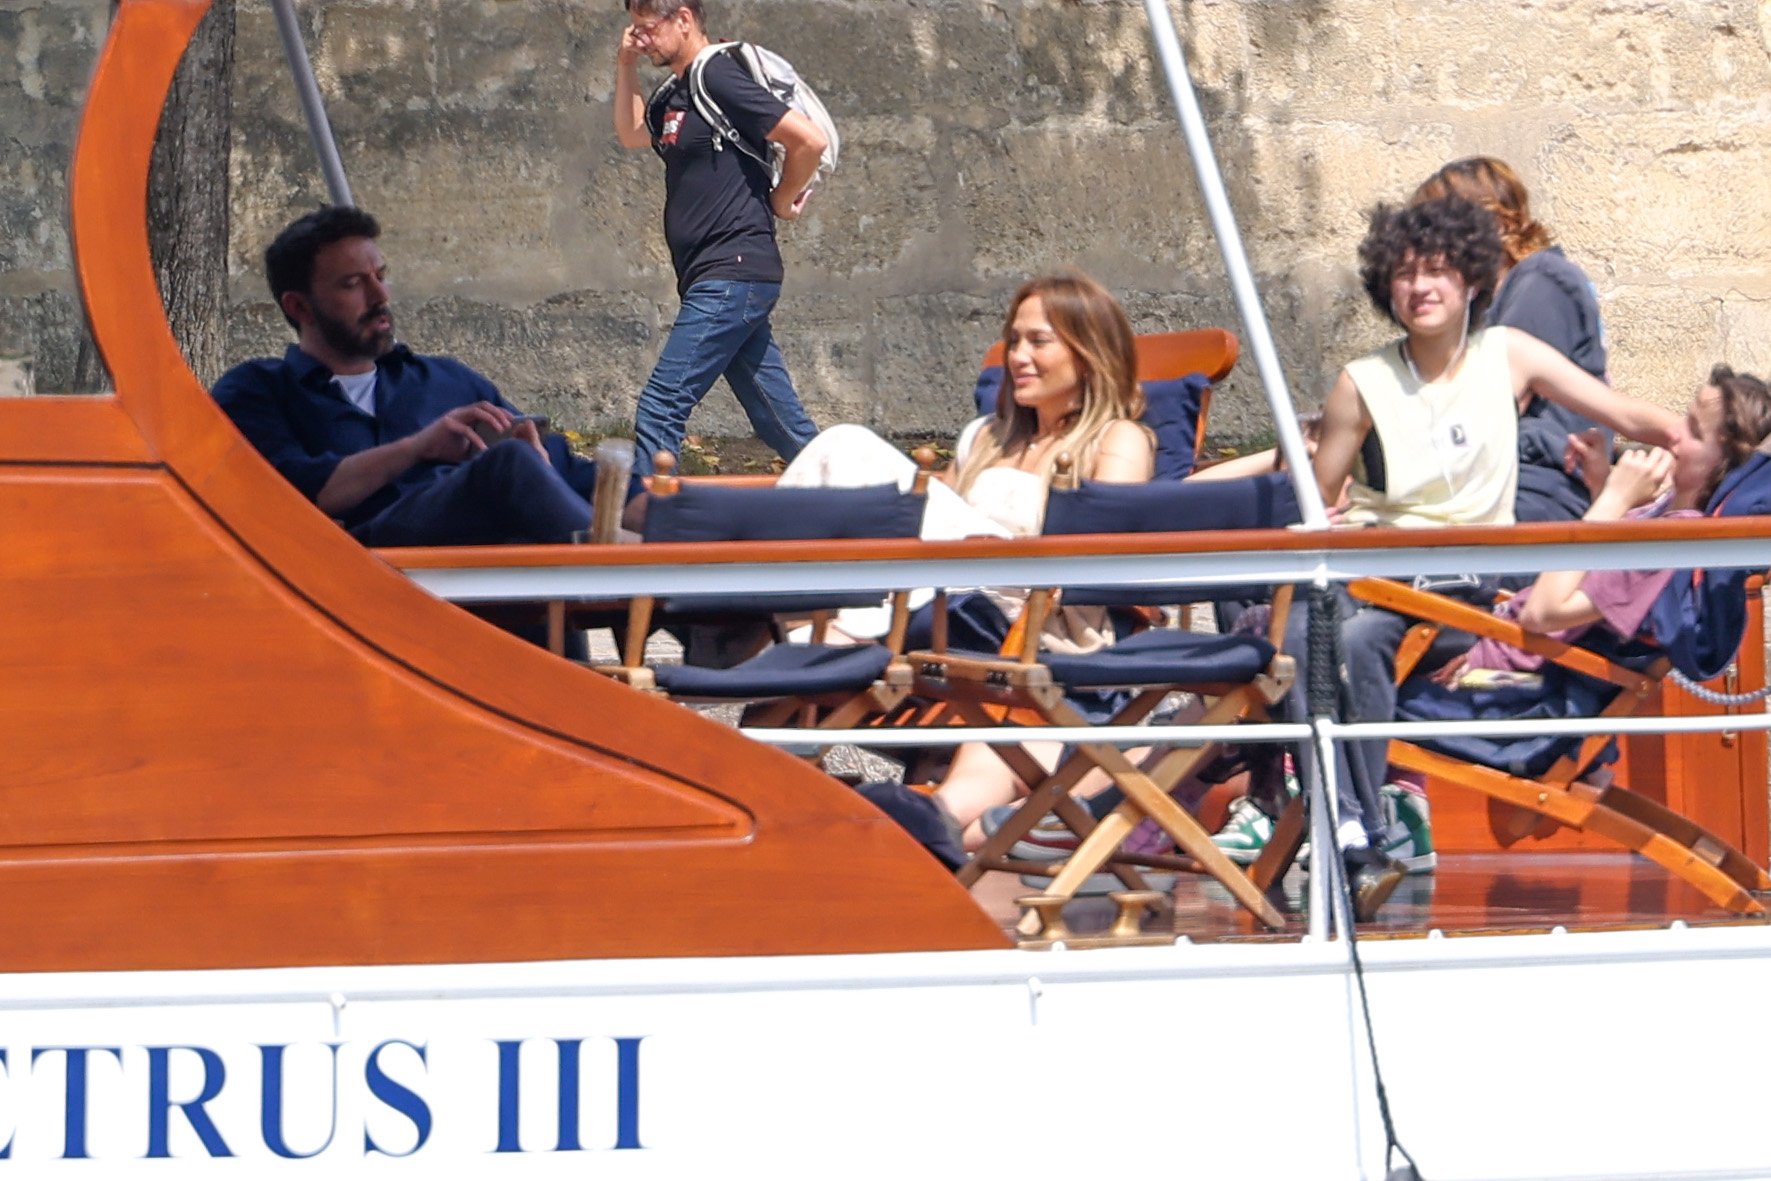 Jennifer Lopez and Ben Affleck pictured on a cruise with some of their children, Seraphina Affleck and Emme Muniz on July 23, 2022 in Paris, France | Source: Getty Images